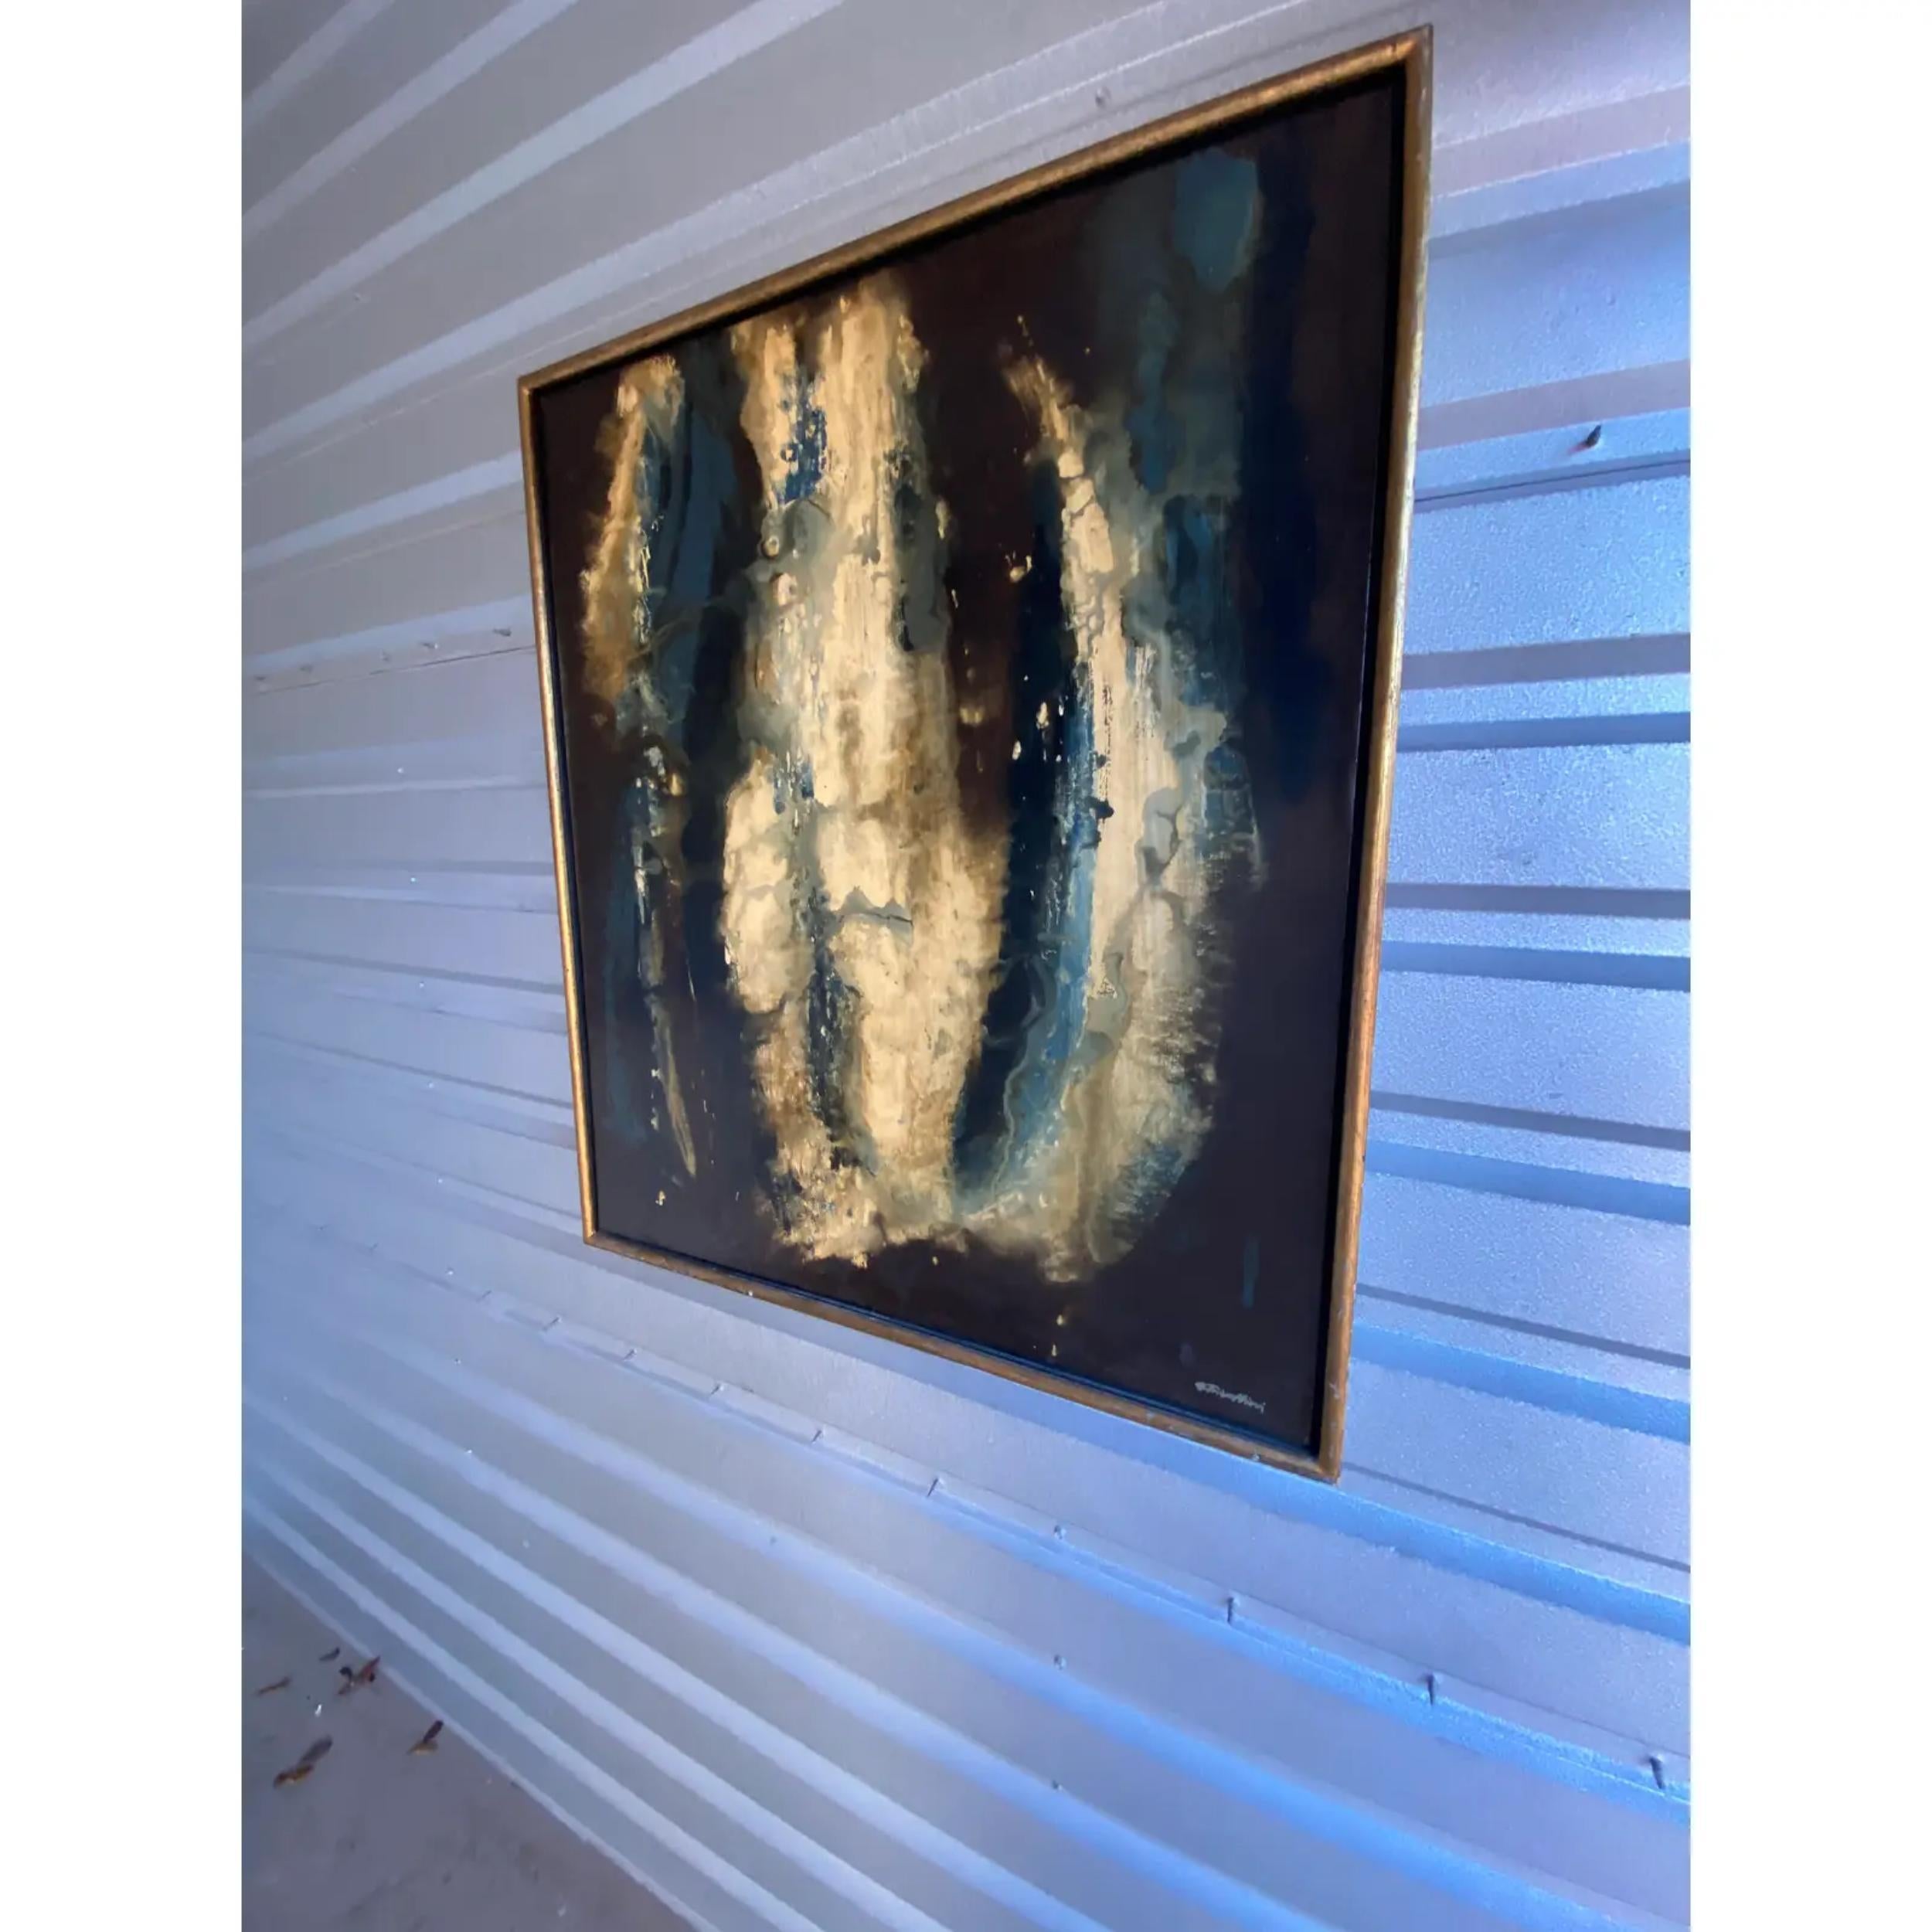 Incredible MidCentury abstract oil painting. Signed George Trivolinni who was famous during the “Rat Pack” era. Collected by celebrities like Steve Mcqueen and Dean Martin. Signed